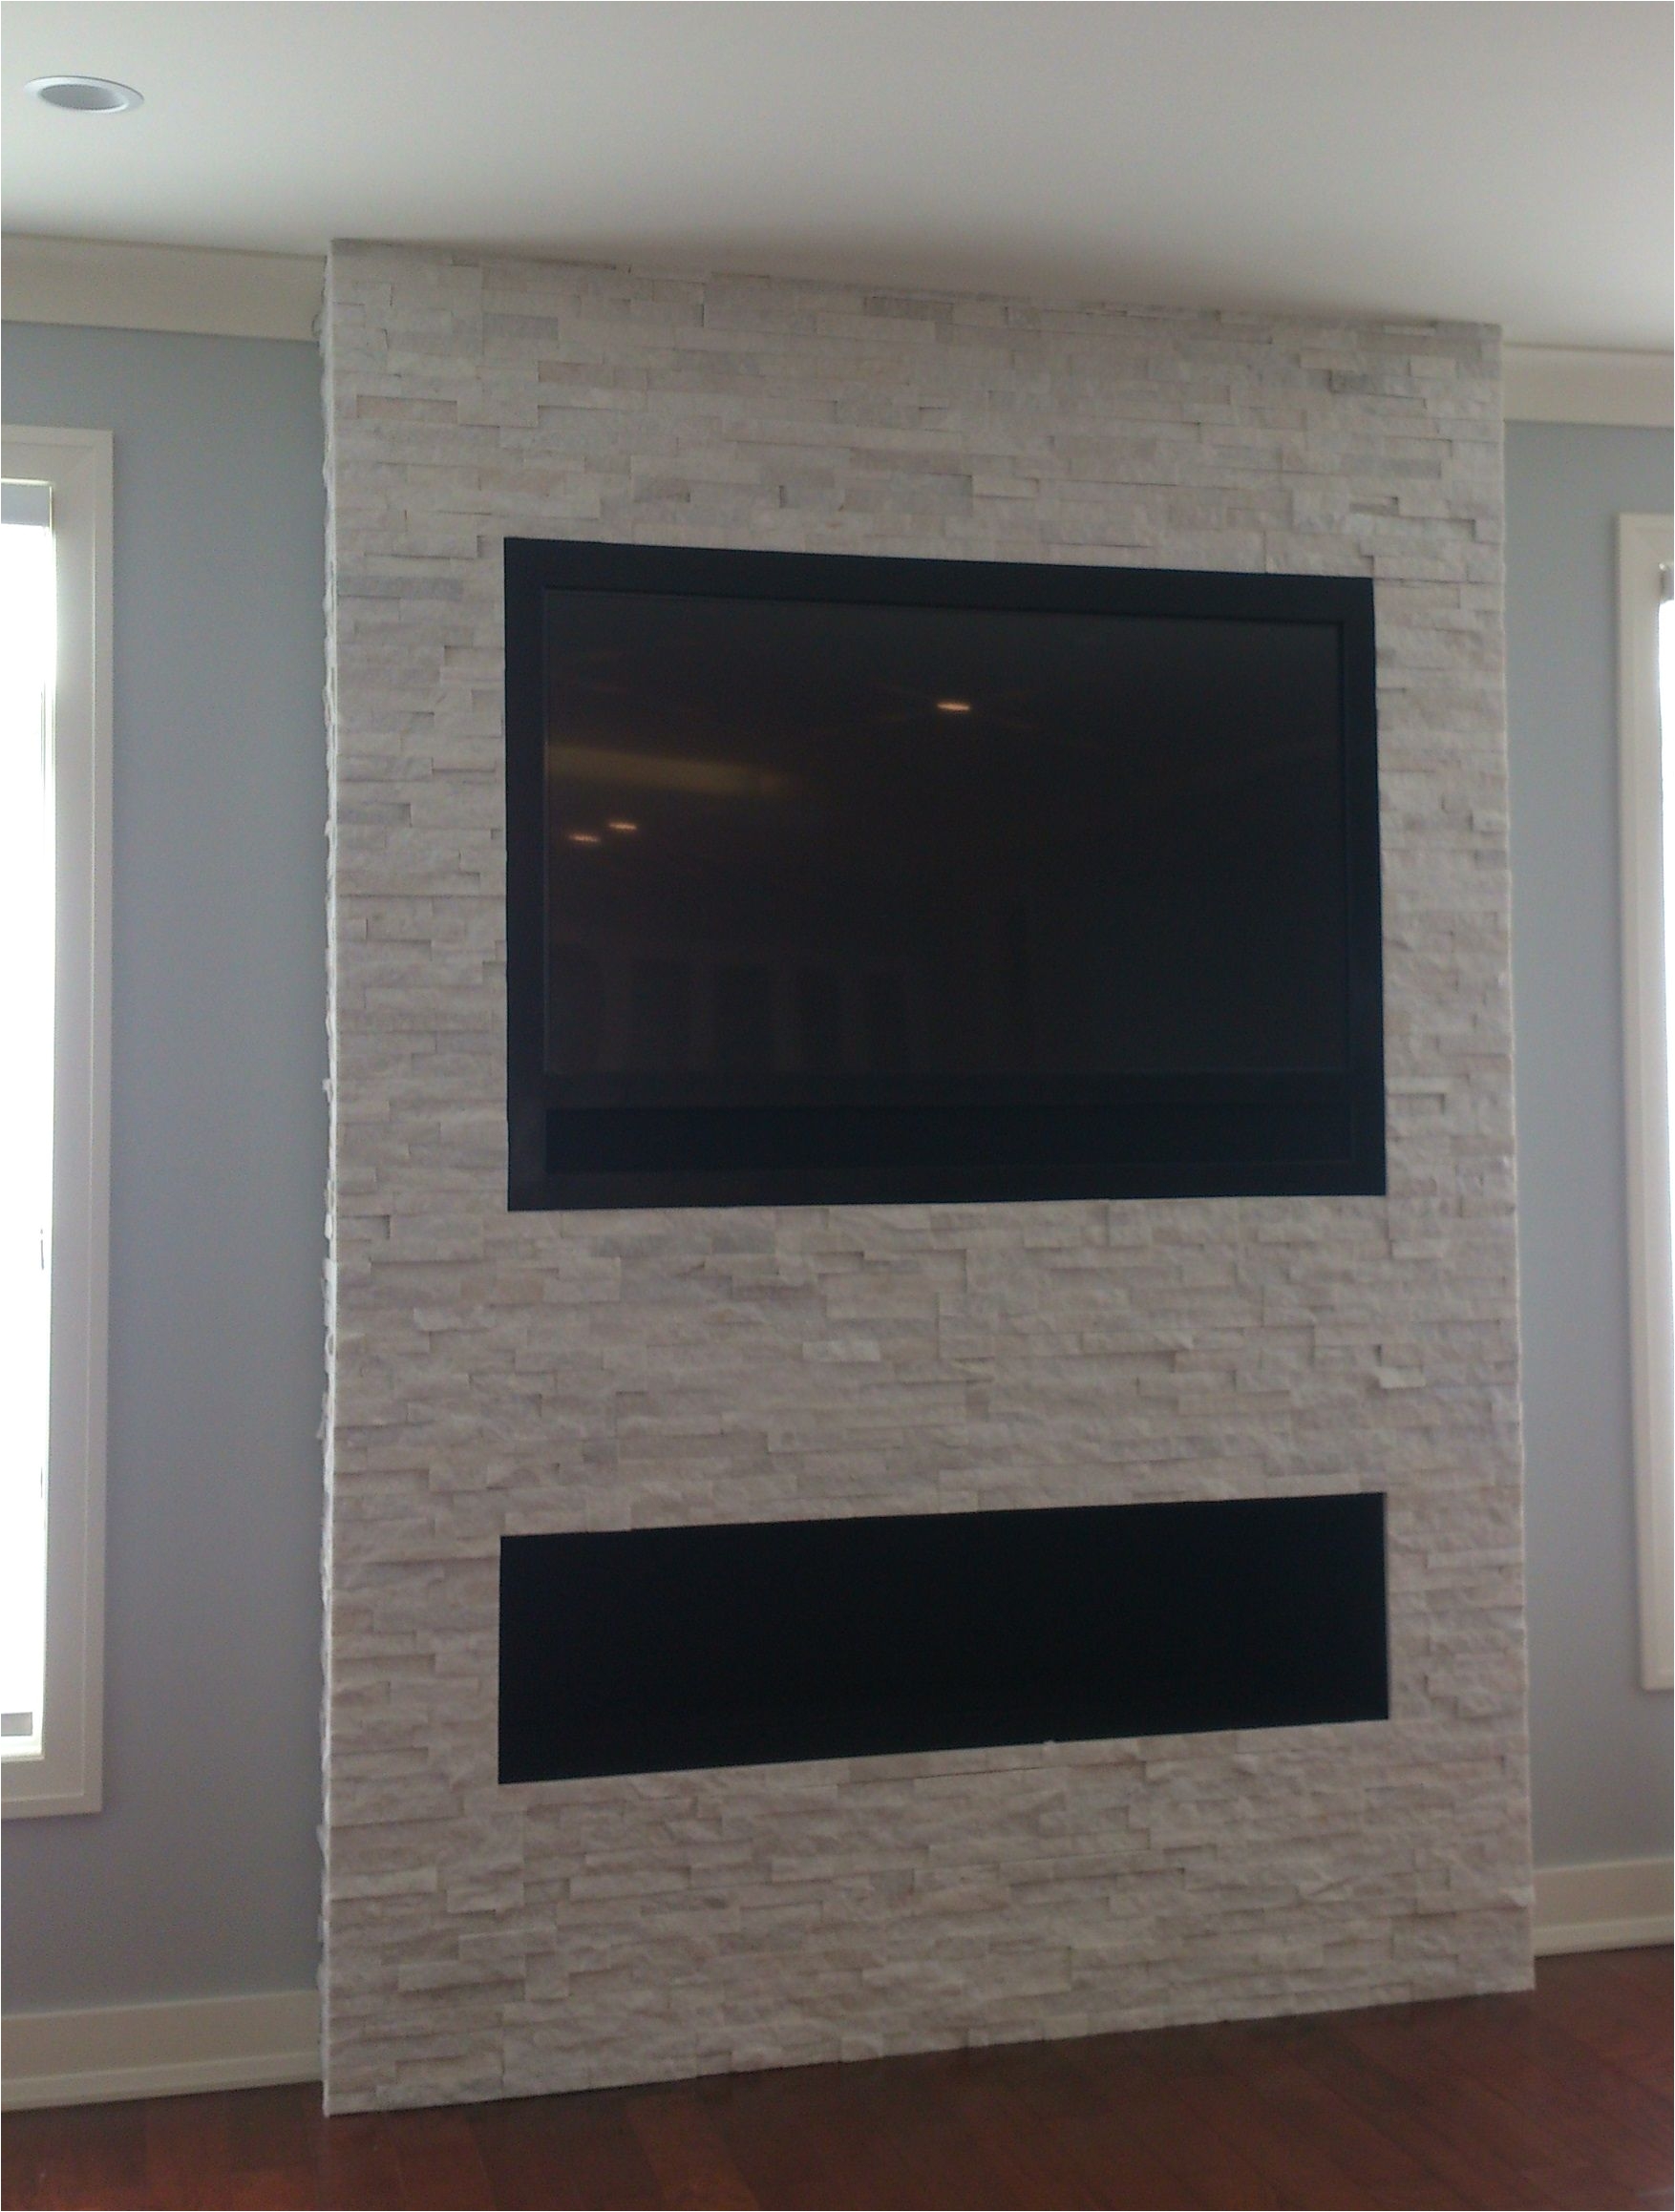 Tv Above Fireplace Ideas Unique Gas Fireplace without Mantle Wondering How to Mount A Tv